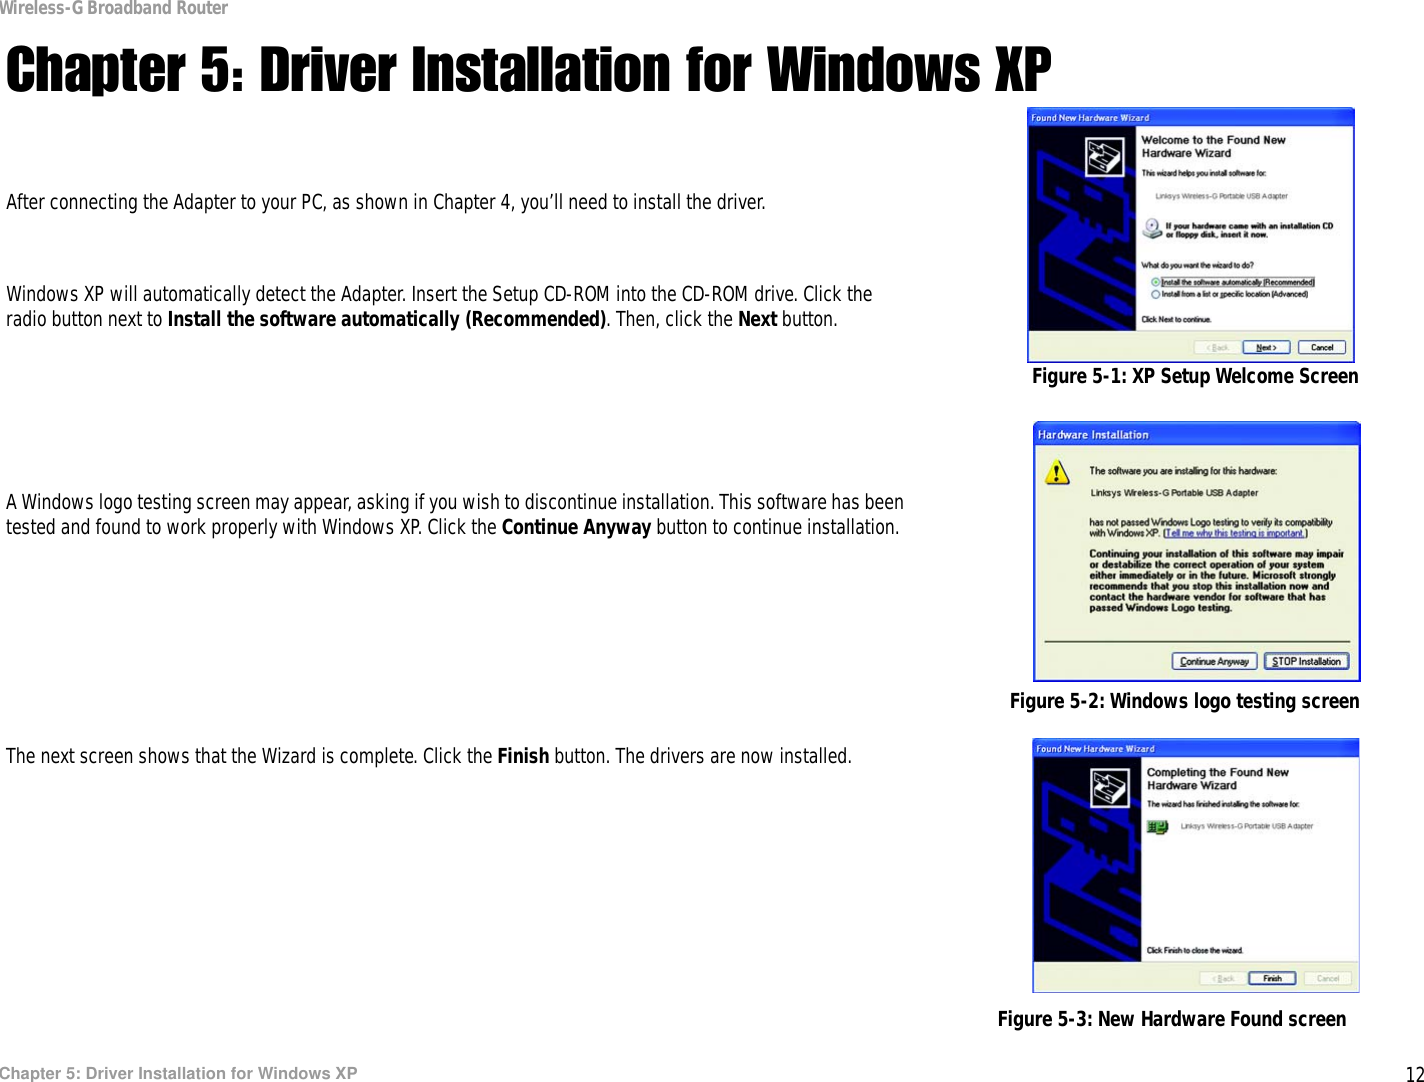 12Chapter 5: Driver Installation for Windows XPWireless-G Broadband RouterChapter 5: Driver Installation for Windows XPAfter connecting the Adapter to your PC, as shown in Chapter 4, you’ll need to install the driver.Windows XP will automatically detect the Adapter. Insert the Setup CD-ROM into the CD-ROM drive. Click the radio button next to Install the software automatically (Recommended). Then, click the Next button.A Windows logo testing screen may appear, asking if you wish to discontinue installation. This software has been tested and found to work properly with Windows XP. Click the Continue Anyway button to continue installation.The next screen shows that the Wizard is complete. Click the Finish button. The drivers are now installed. Figure 5-1: XP Setup Welcome ScreenFigure 5-2: Windows logo testing screenFigure 5-3: New Hardware Found screen